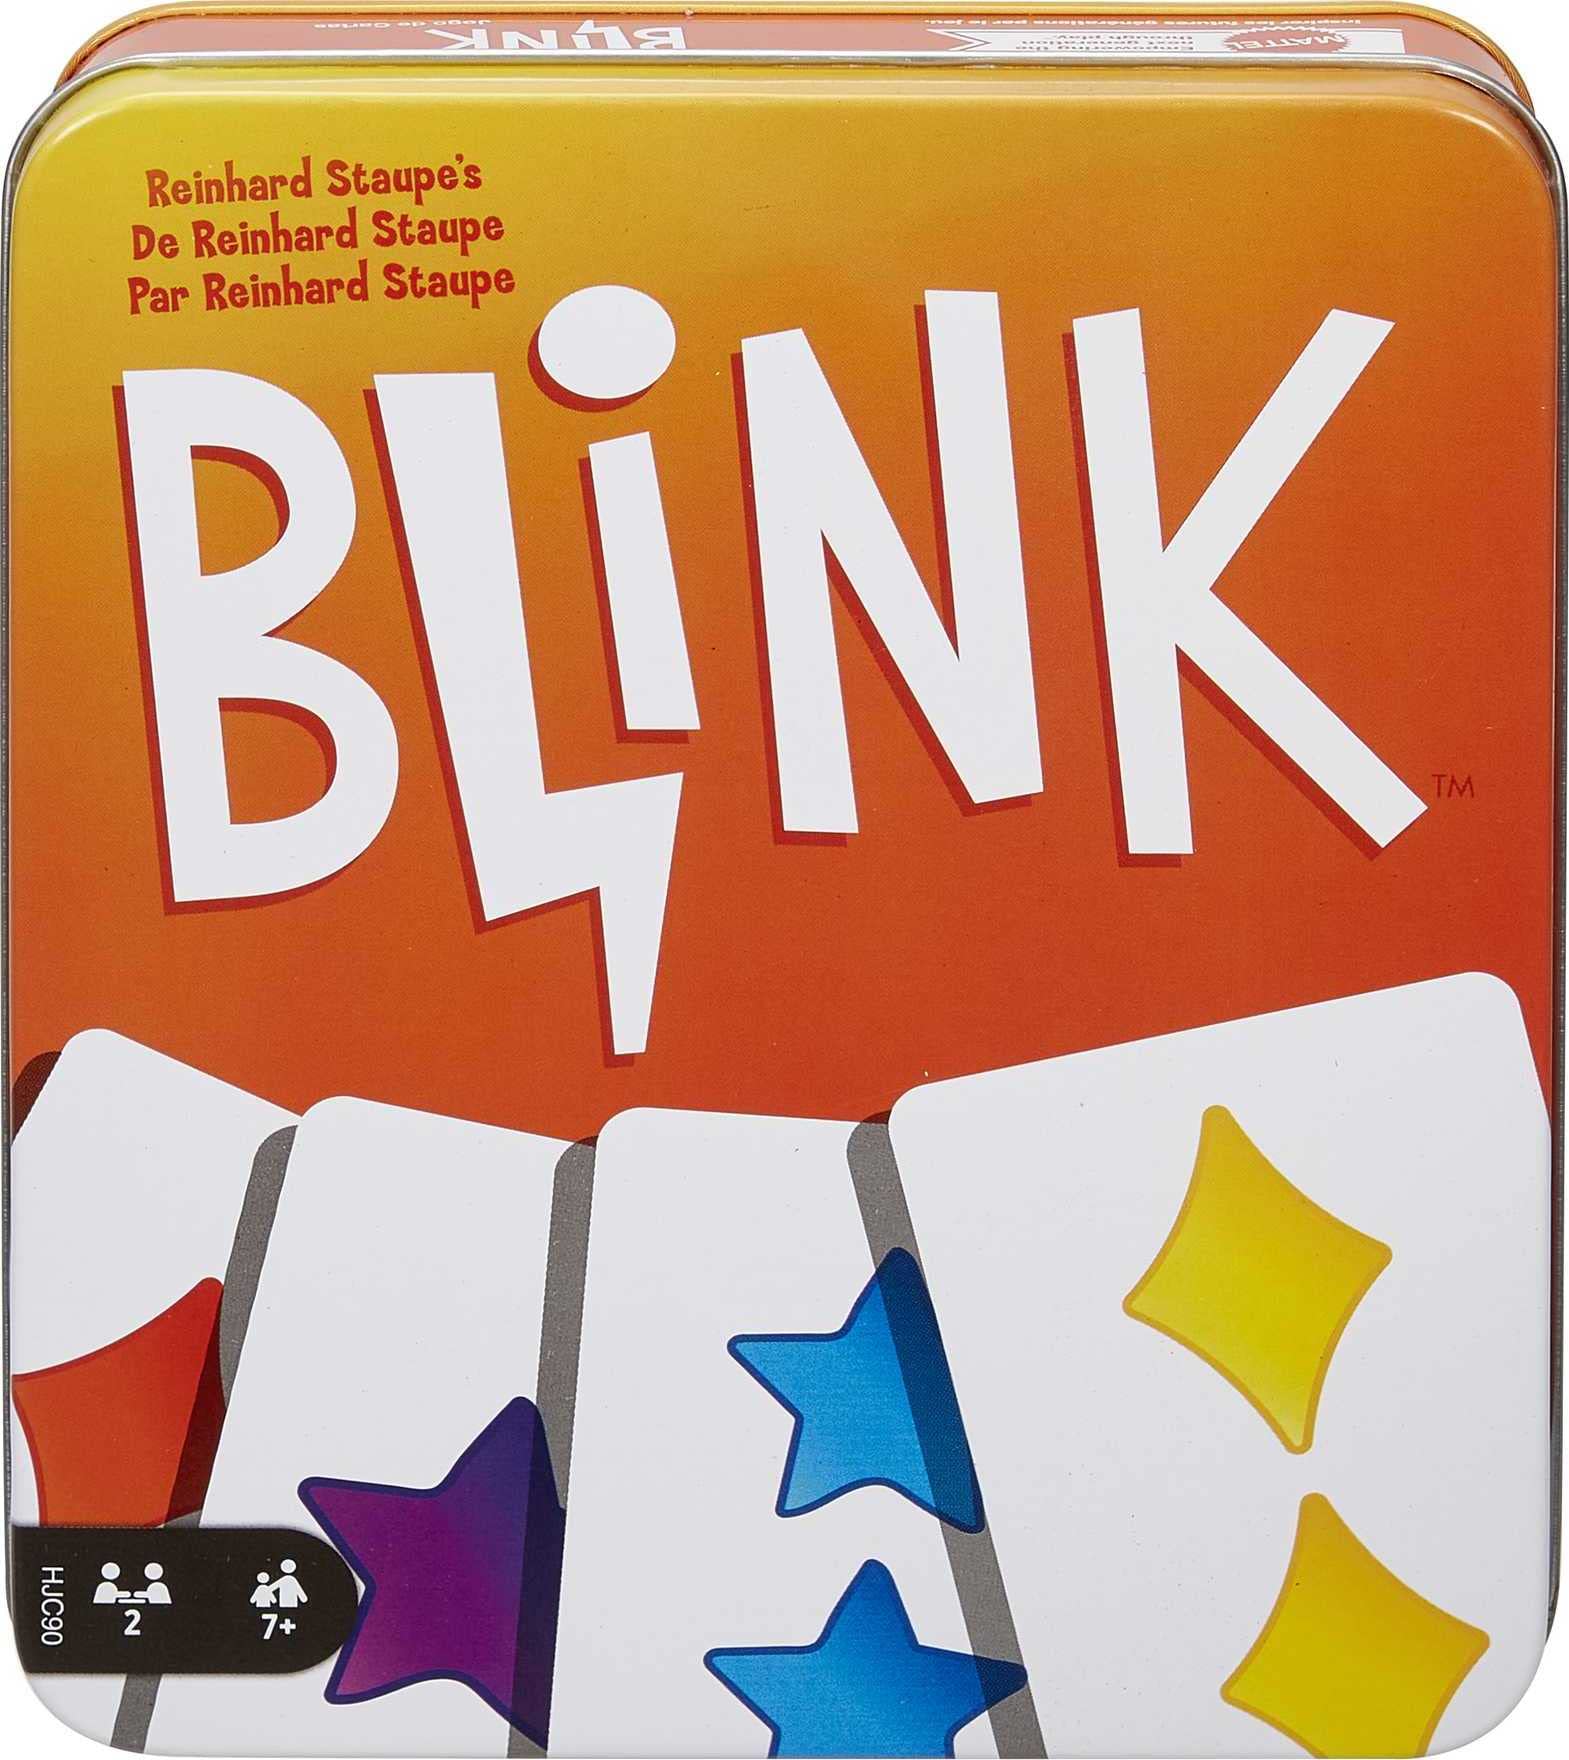 Mattel Games Blink Card Game for Family Night, World's Fastest Card Game, Easy for Kids in a Collectible Storage Tin (Amazon Exclusive)